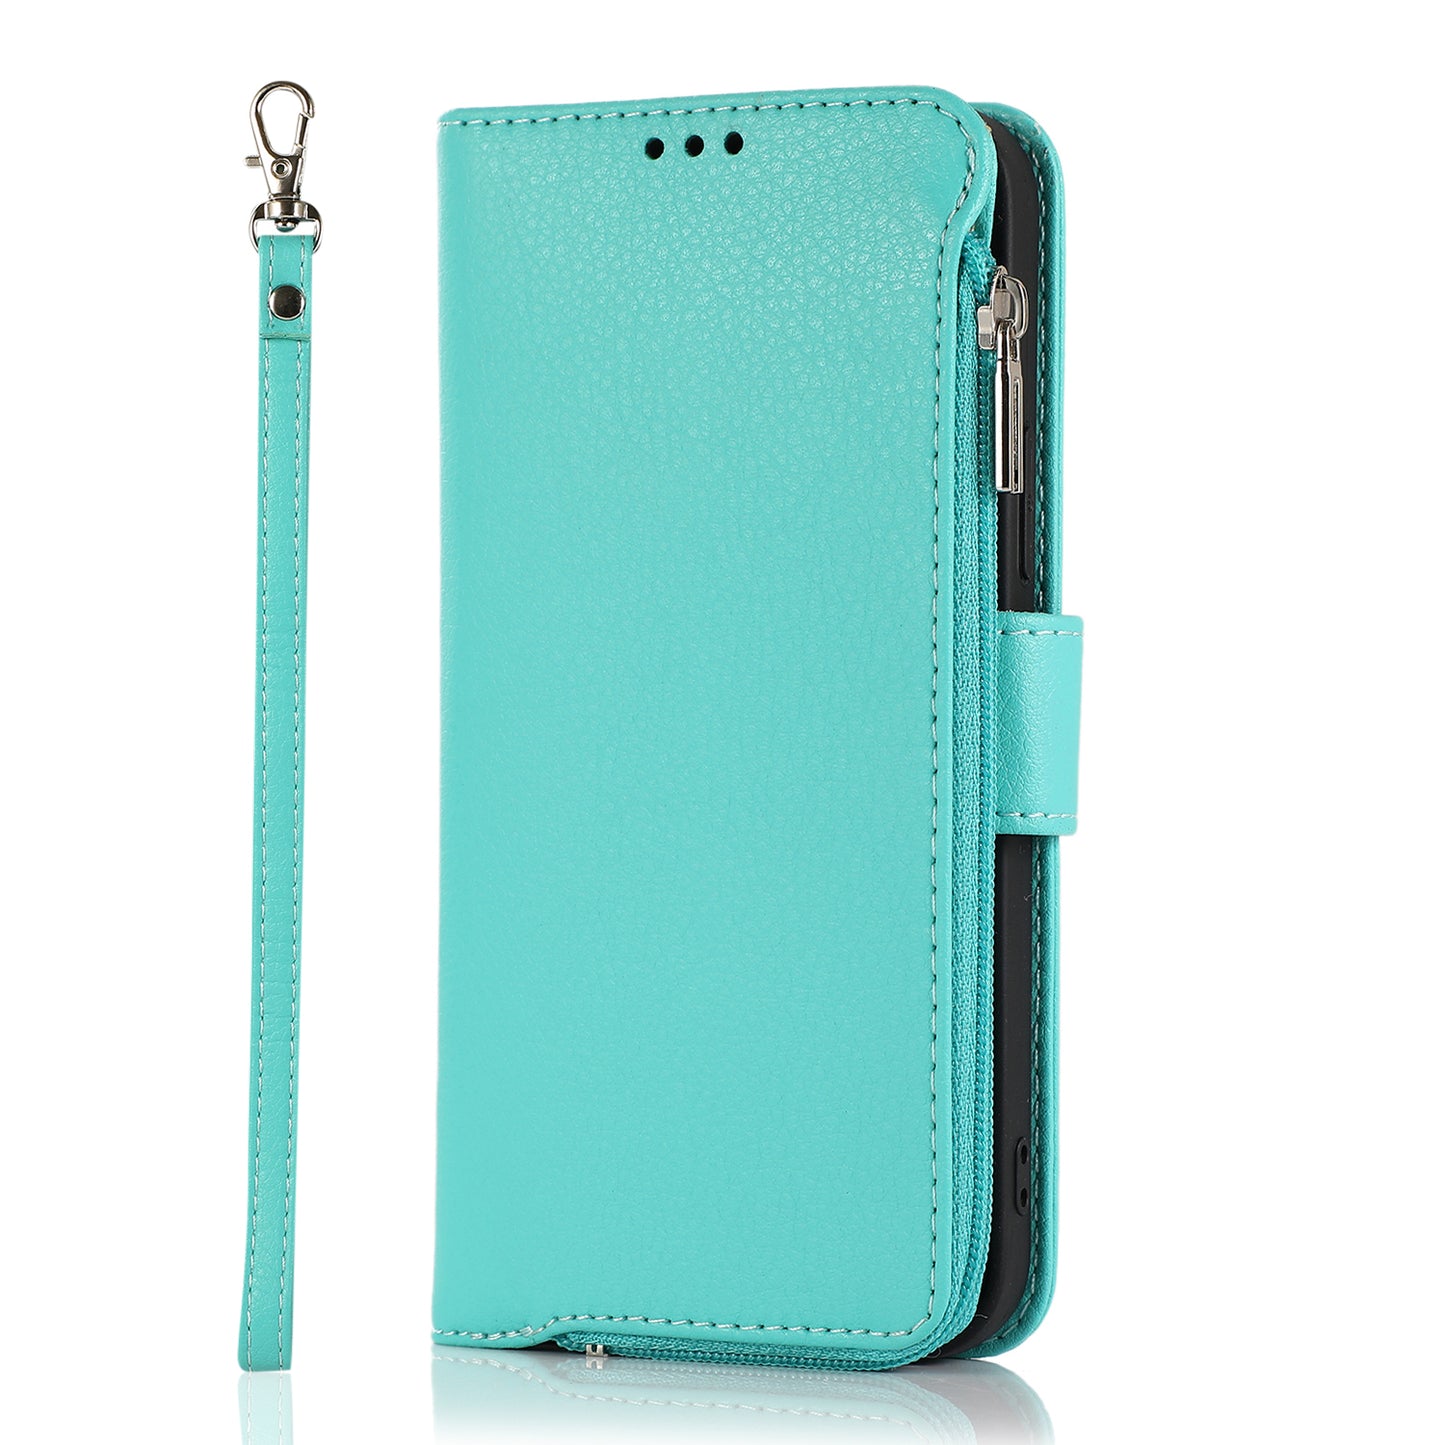 Apple iPhone 12 Pro Max Leather Case Zipper Pouch TPU Fexible Stand Card Slots Magnetic Hand Strap